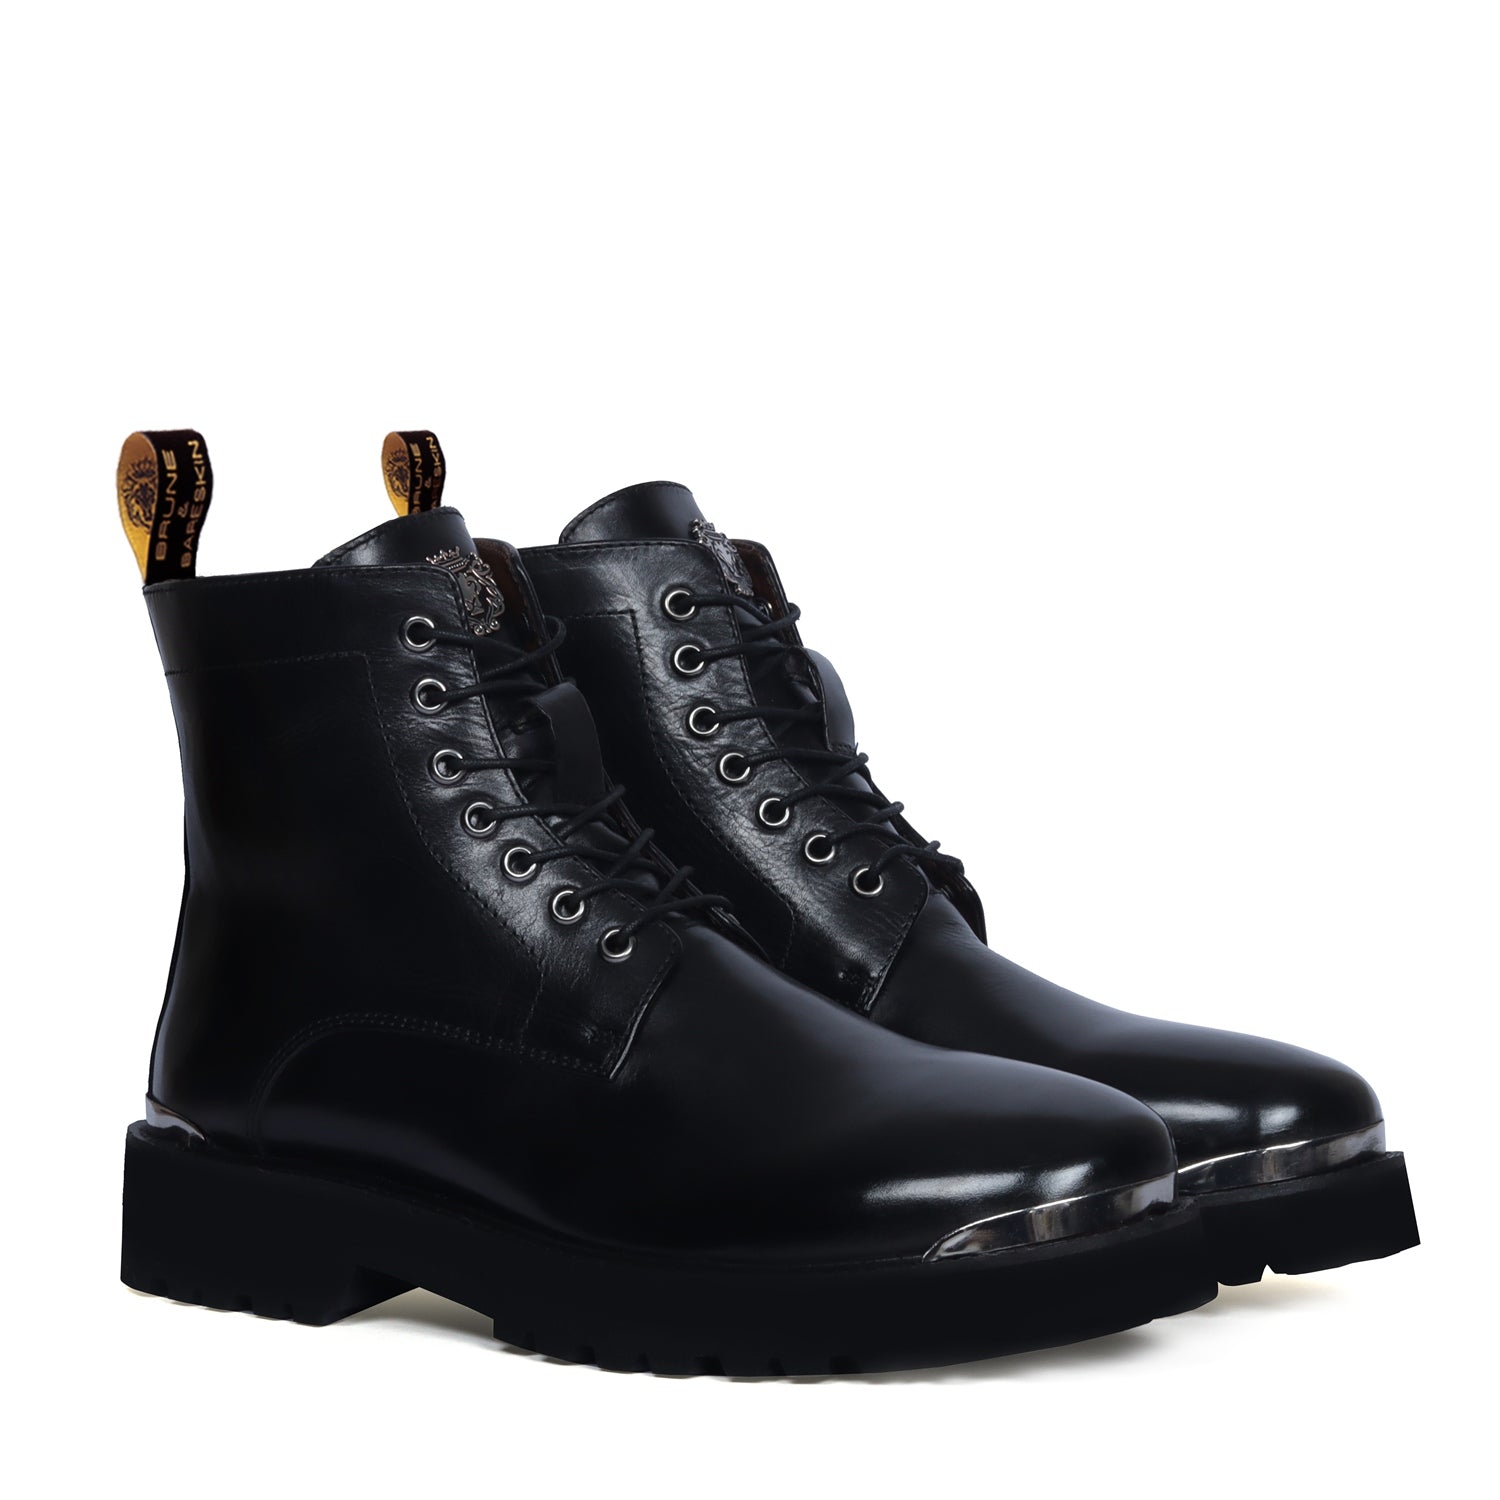 Lace-Up Closure Metal Plate Black Genuine Leather Chunky Boots By Brune & Bareskin